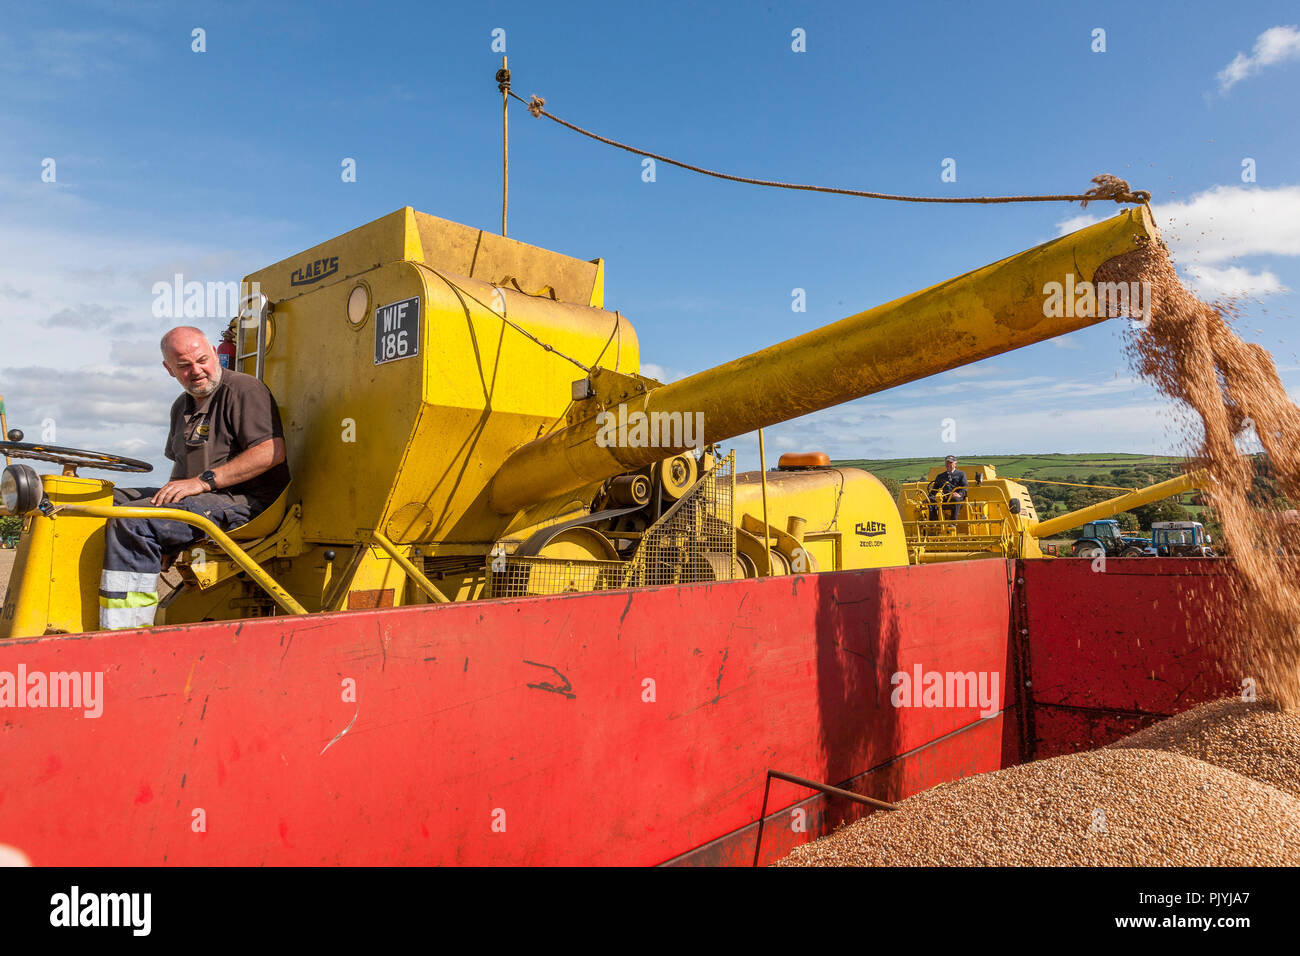 Timoleague, Cork, Ireland. 9th September 2018. JJ Browne from Carrigadrohid empting Wheat from his vintage Claeys Combine harvester into a trailer at the West Cork Vintage Ploughing & Threshing event that was held at Barryshall Timoleague Co.Cork. Credit: David Creedon/Alamy Live News Stock Photo